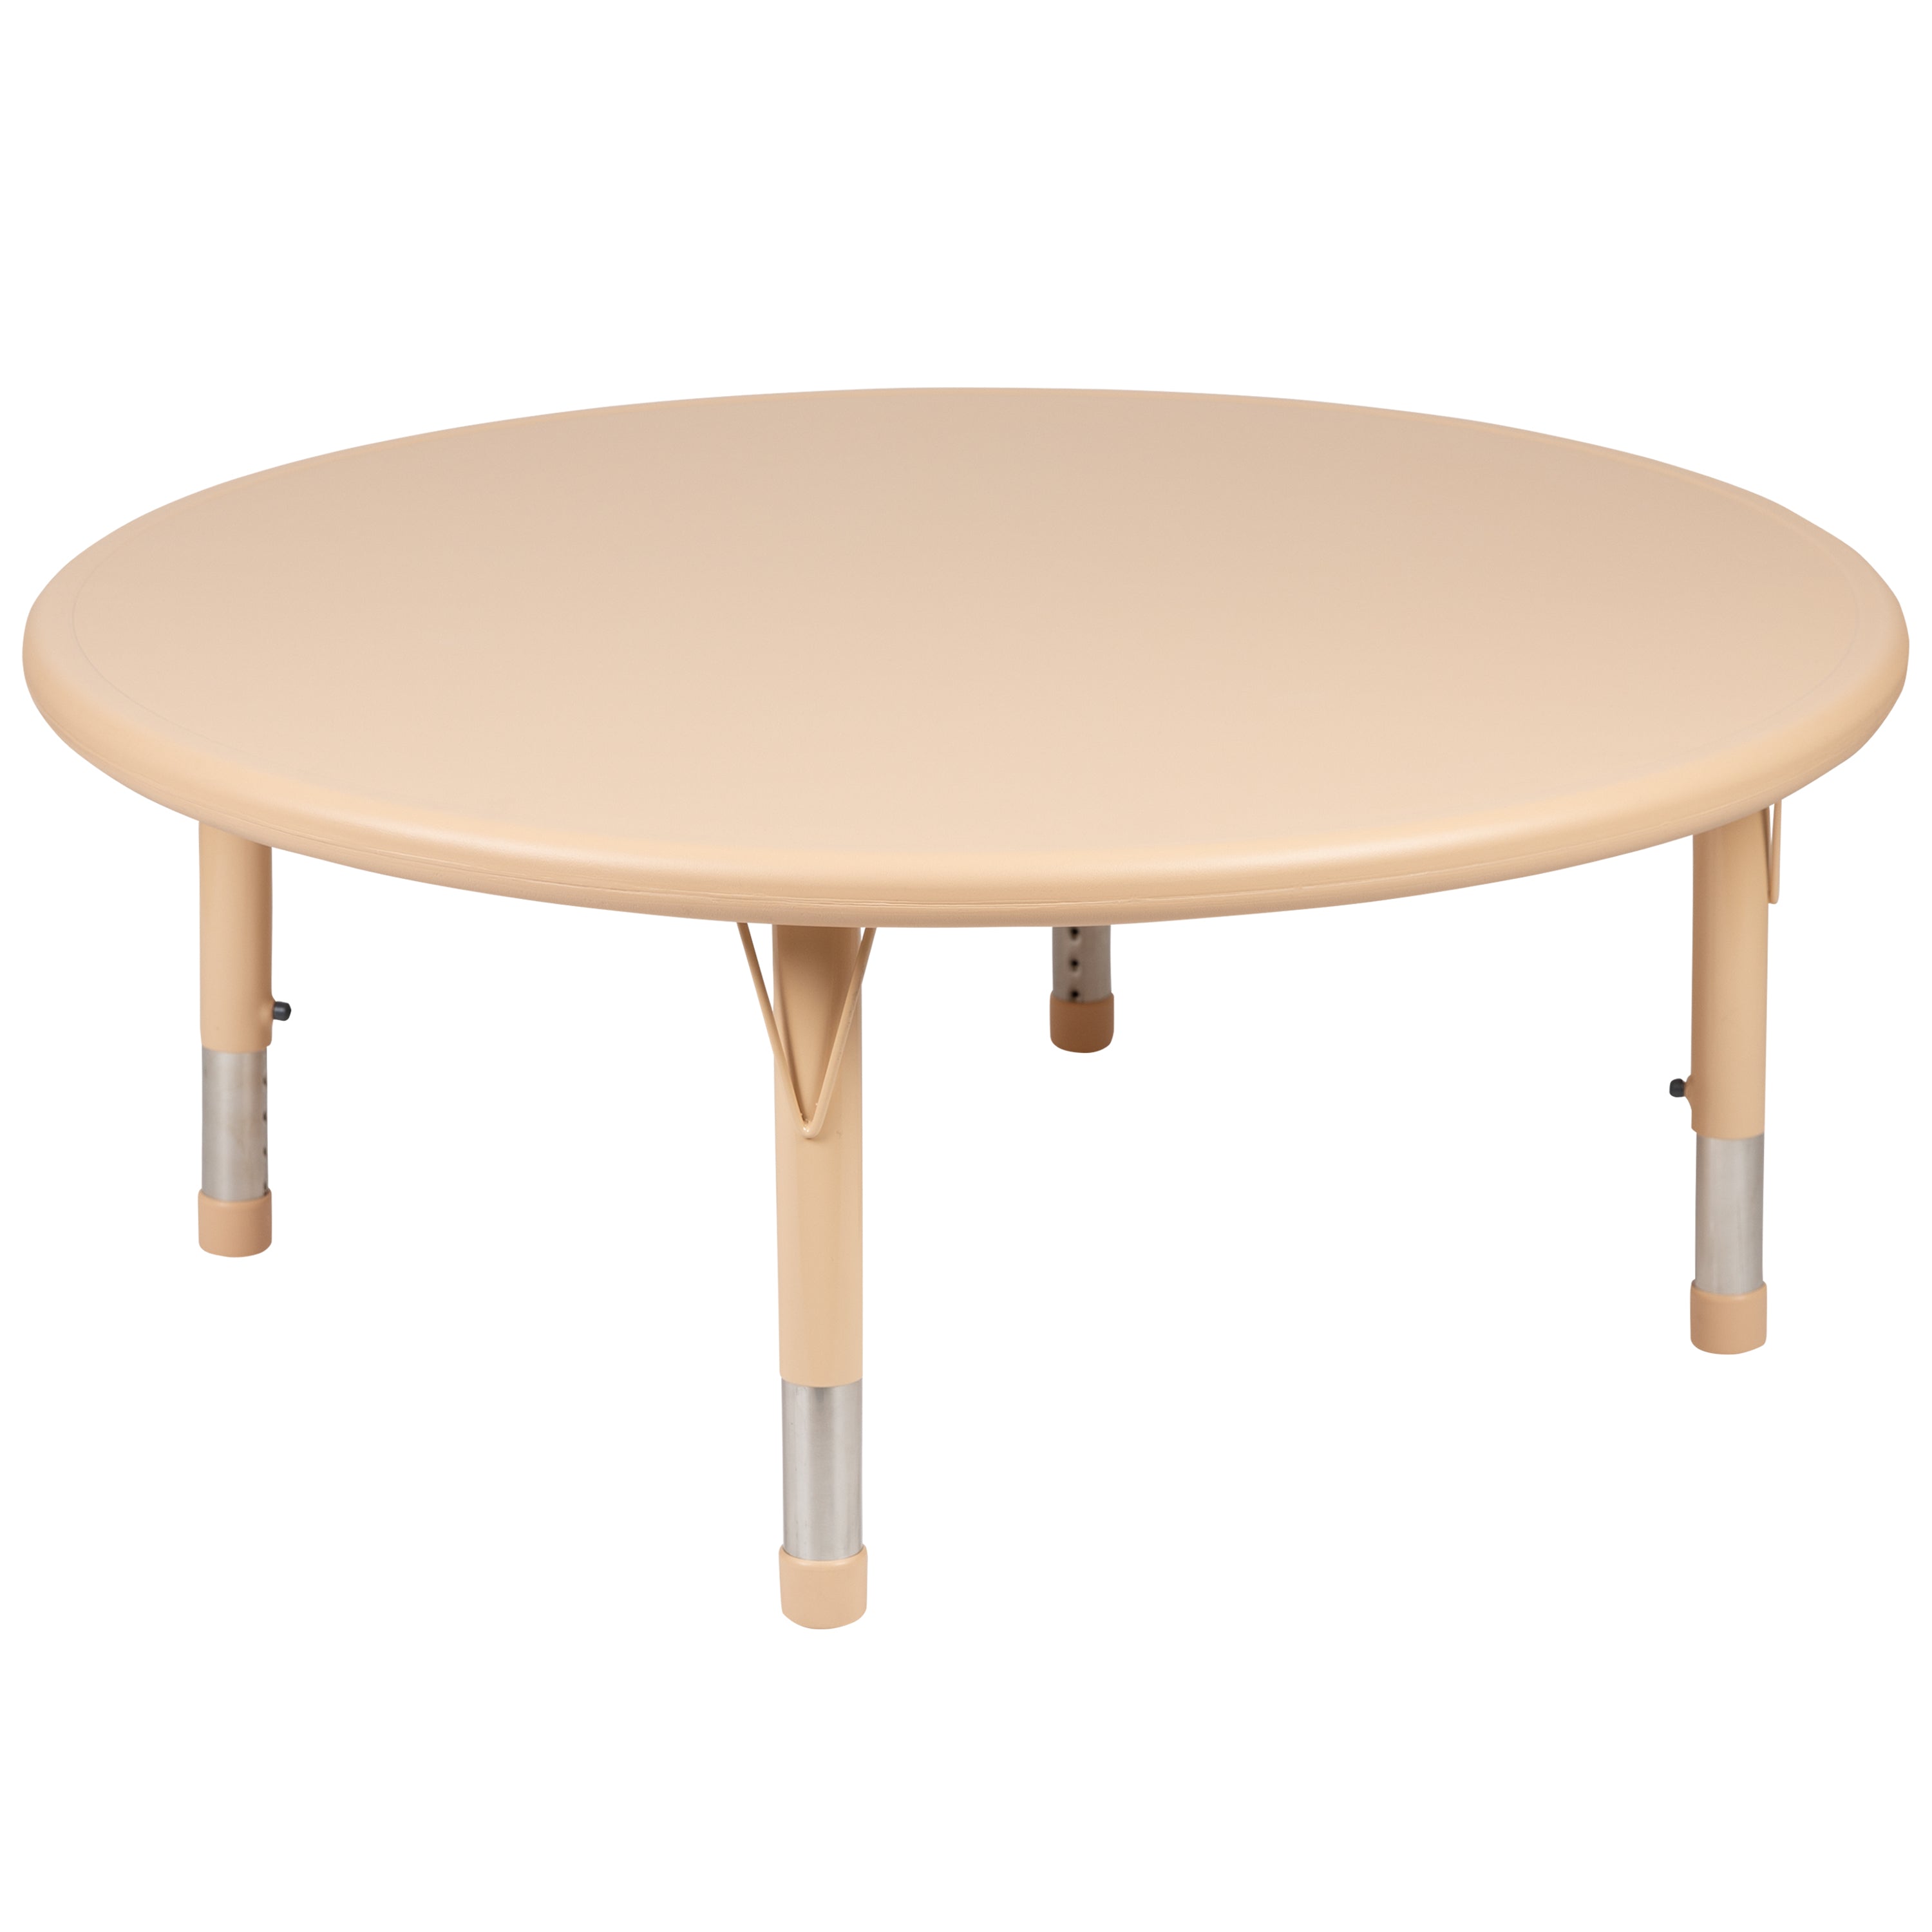 45" Round Plastic Height Adjustable Activity Table-Round Colorful Activity Table-Flash Furniture-Wall2Wall Furnishings